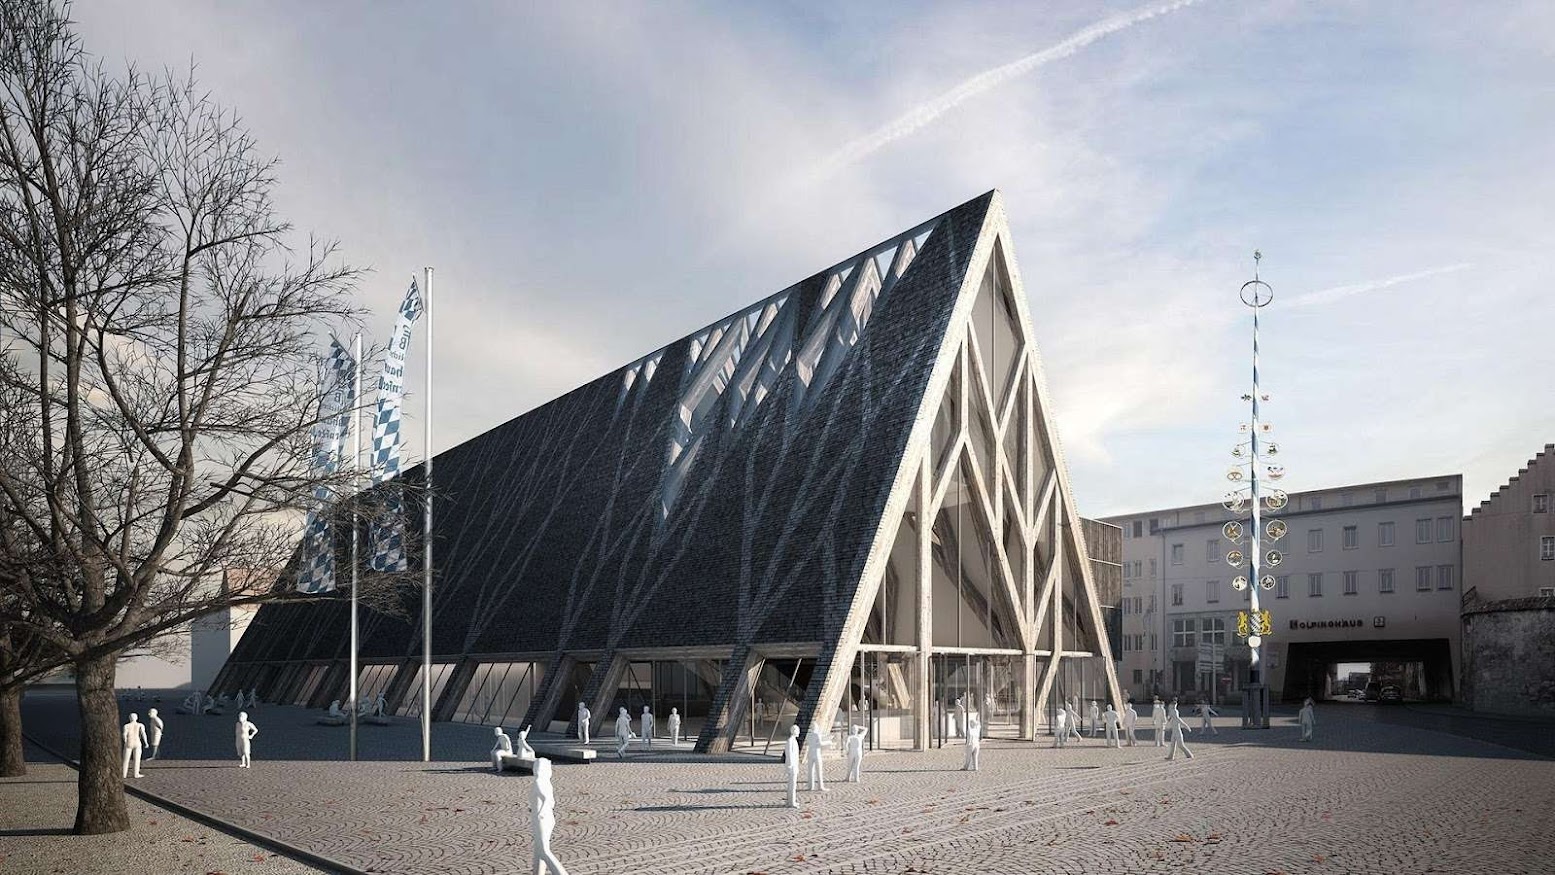 Ratisbona, Germania: [MUSEUM OF BAVARIAN HISTORY COMPETITION ENTRY BY MODOSTUDIO]